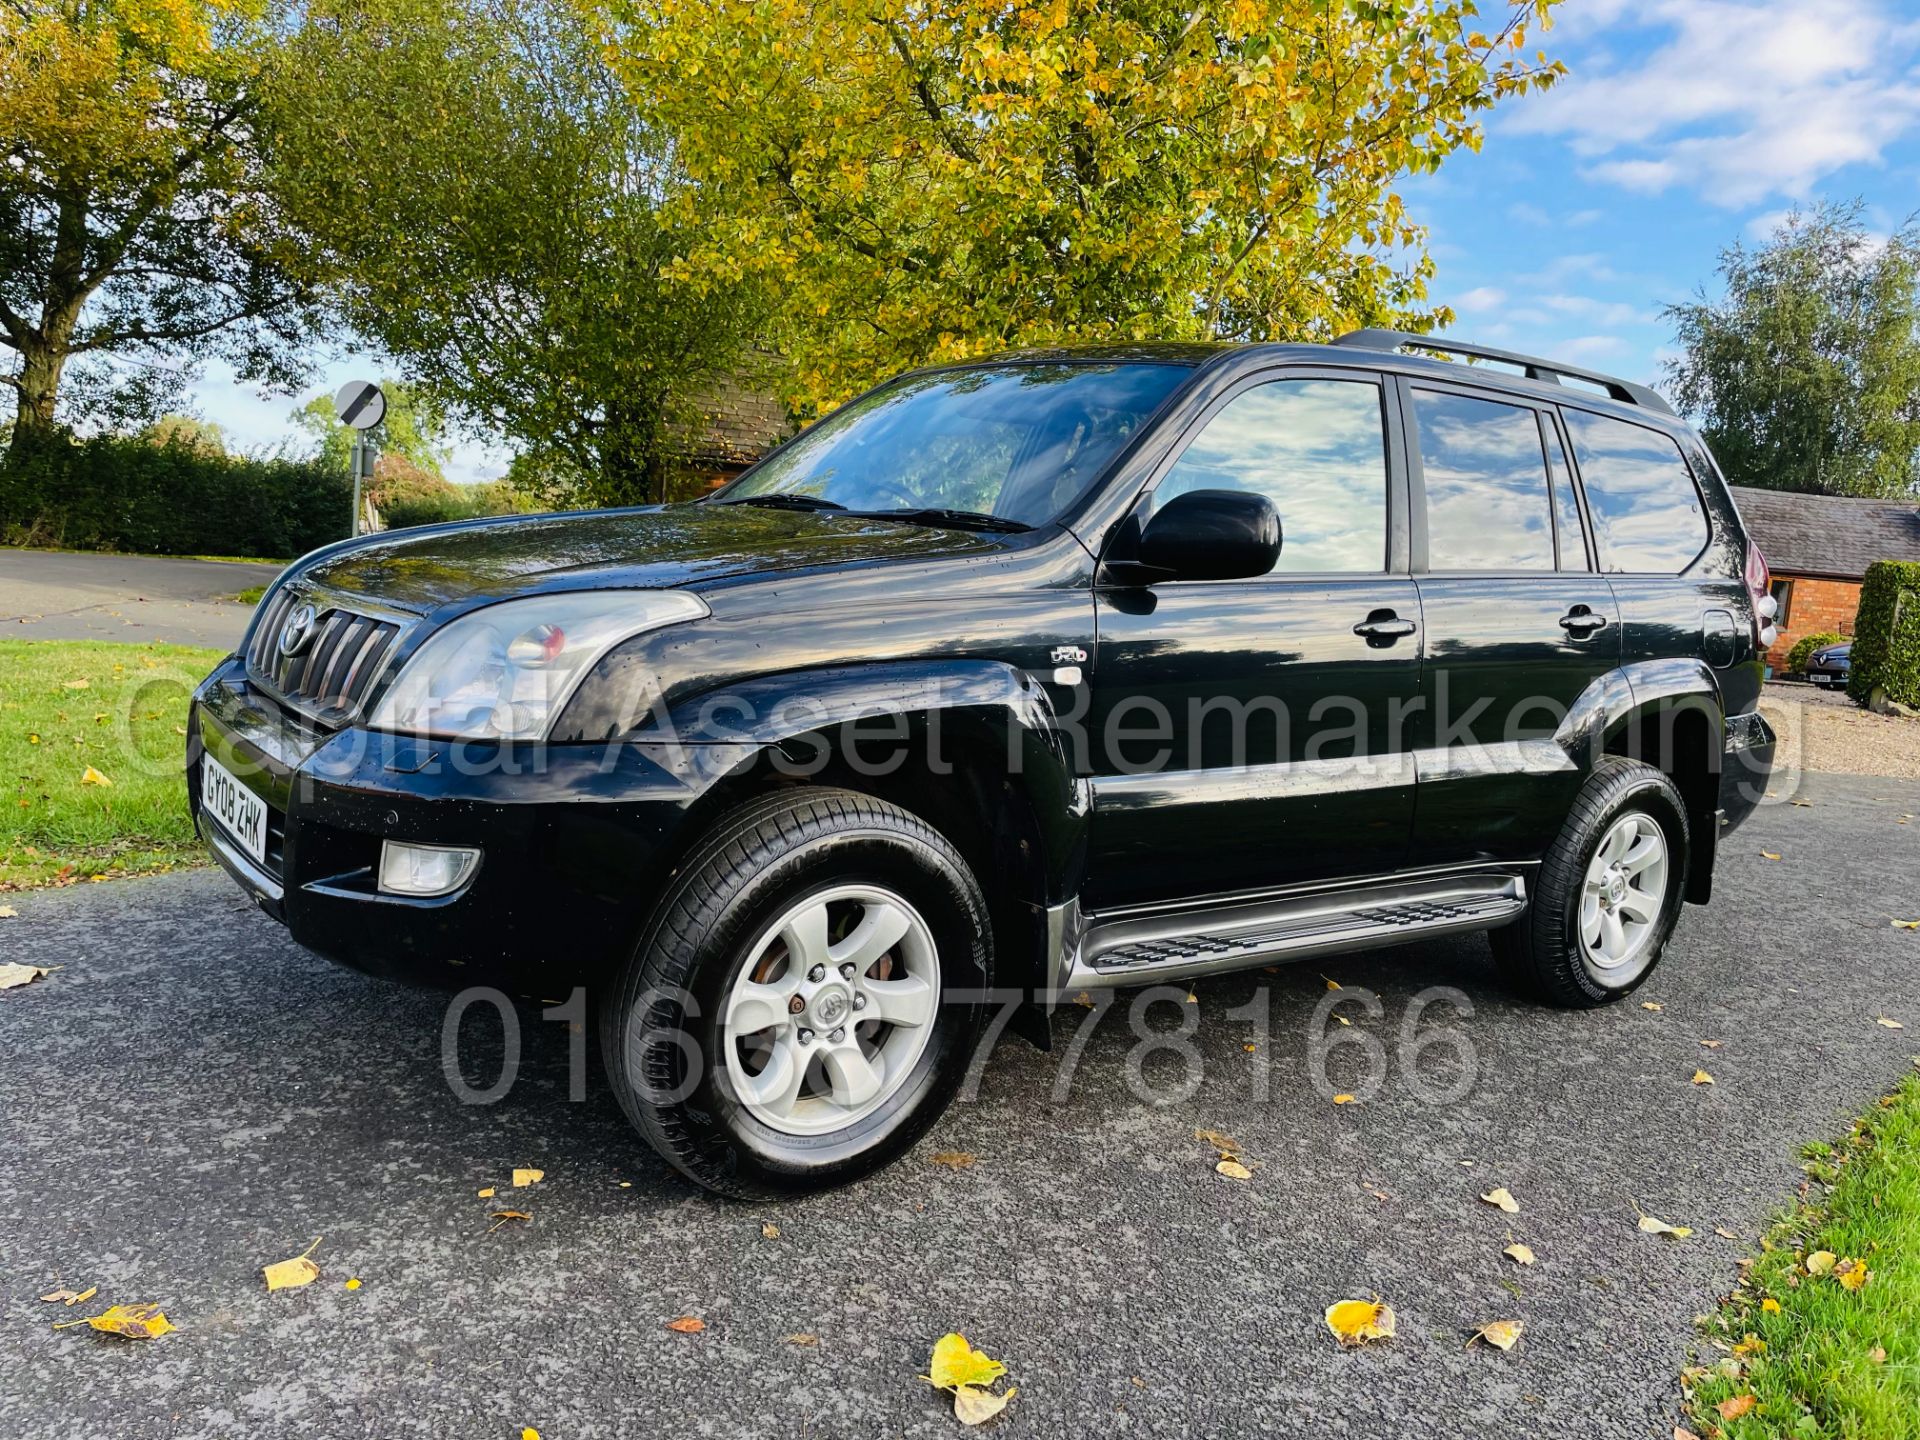 TOYOTA LAND CRUISER *INVINCIBLE* 7 SEATER SUV (2008) '3.0 D-4D - AUTO' *LEATHER & NAV* (1 OWNER)